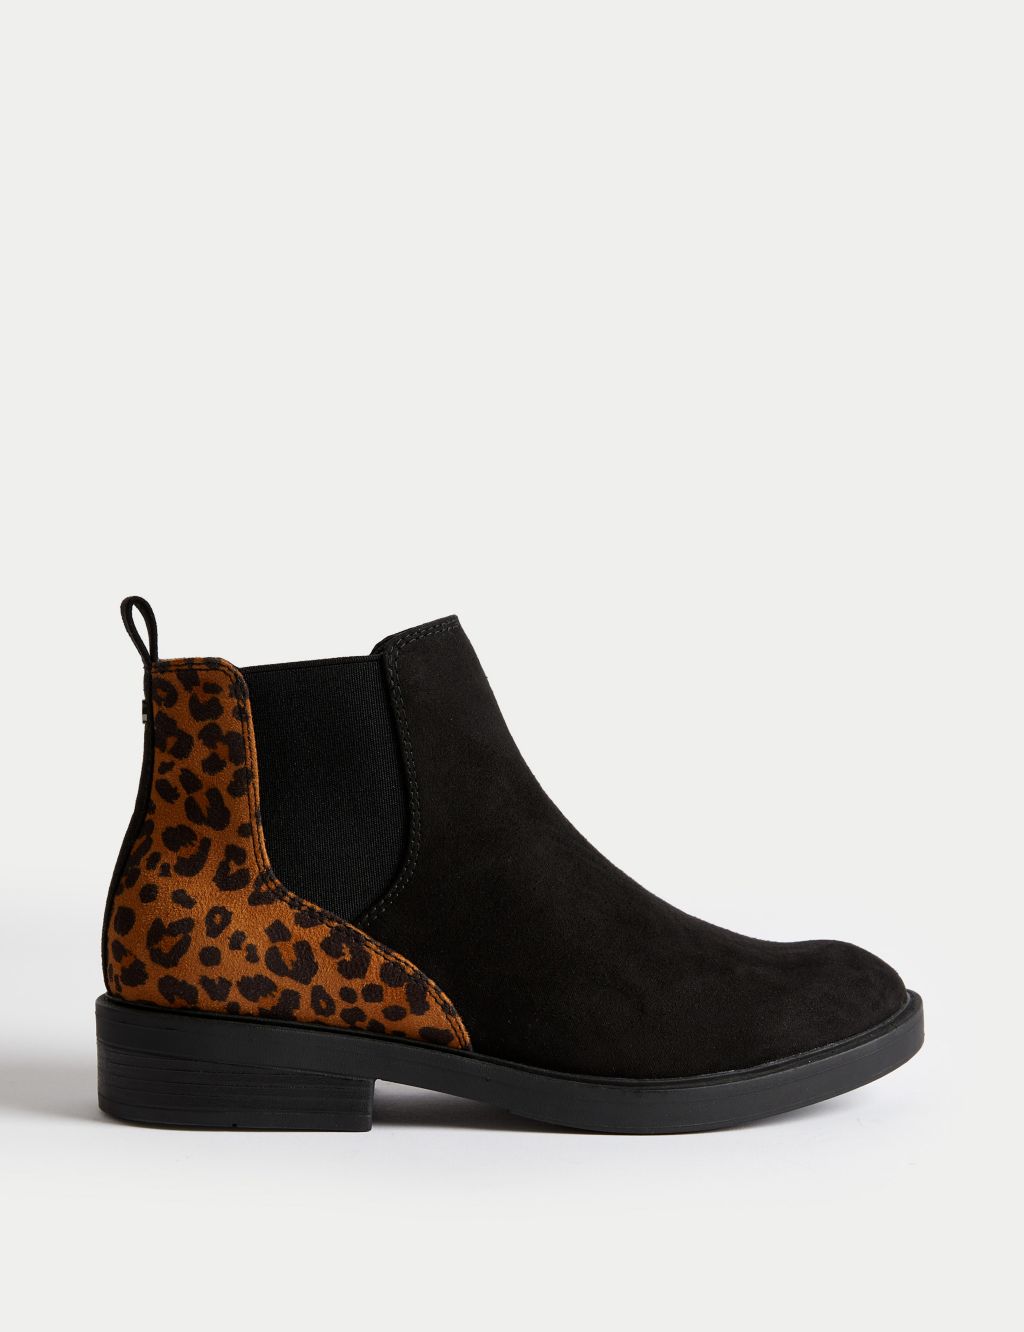 Chelsea Ankle Boots image 1